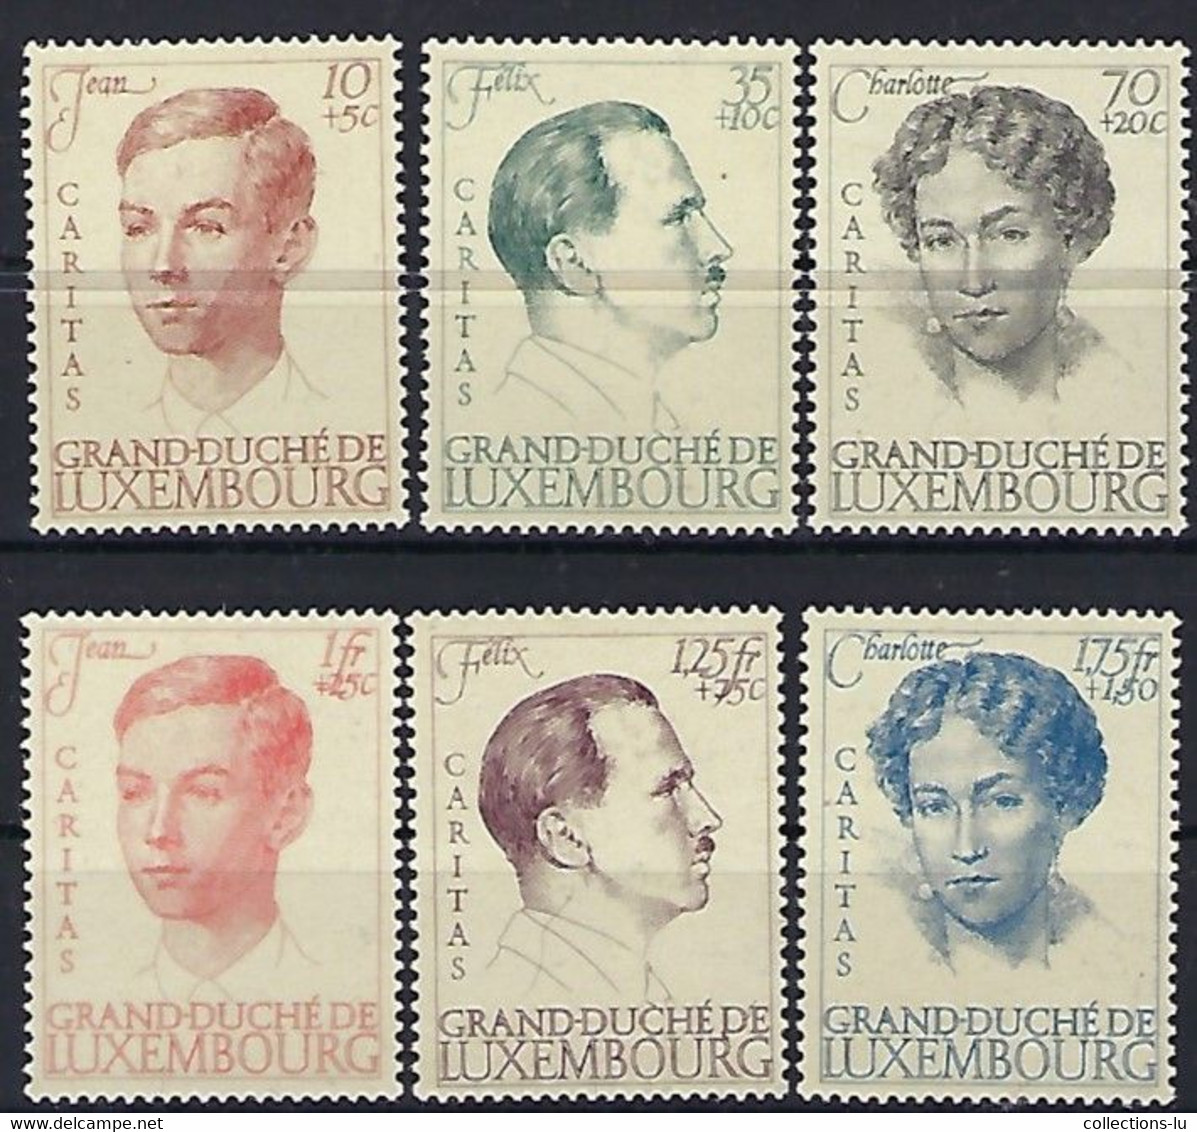 Luxembourg - Luxemburg - Timbres 1939  Série Caritas Dynastie  MNH **  KW 40 - Blocs & Hojas